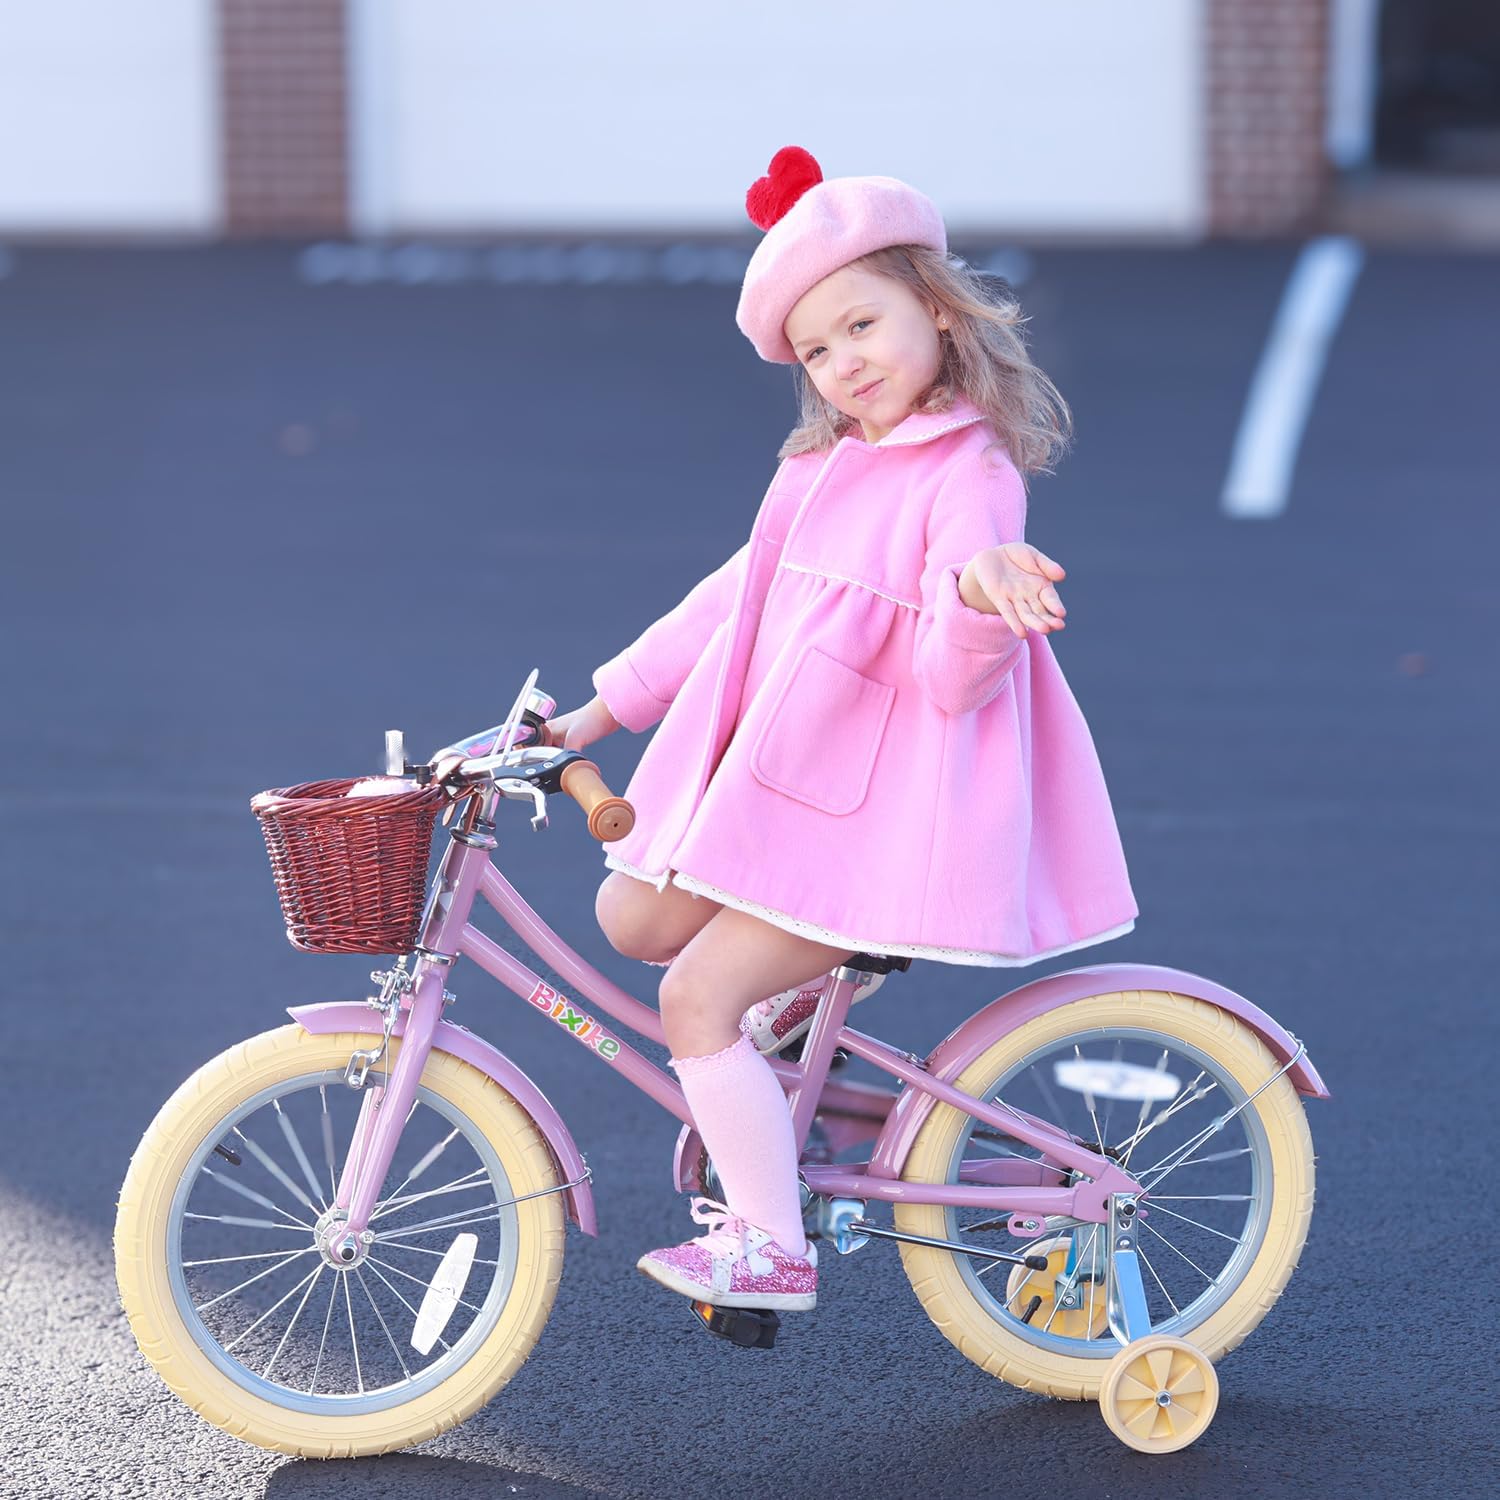 Retro Design Girls Bike with Basket for 5-13 Years Old Kids, 16 Inch Kid Bicycle - $115